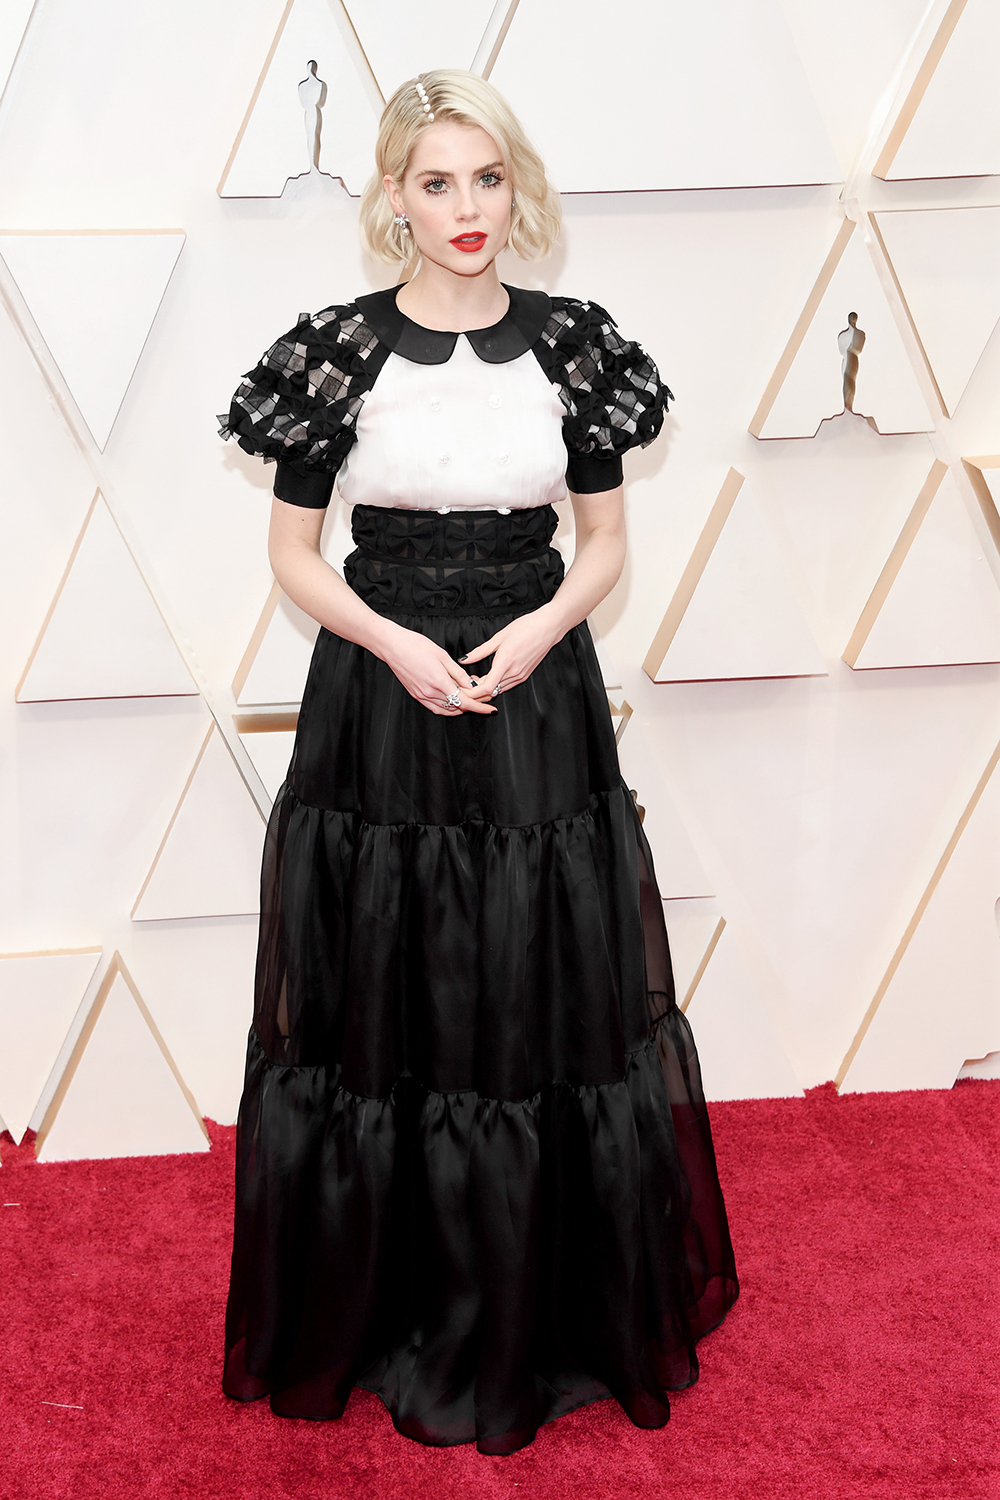 HOLLYWOOD, CALIFORNIA - FEBRUARY 09: Lucy Boynton attends the 92nd Annual Academy Awards at Hollywood and Highland on February 09, 2020 in Hollywood, California. (Photo by Kevin Mazur/Getty Images)